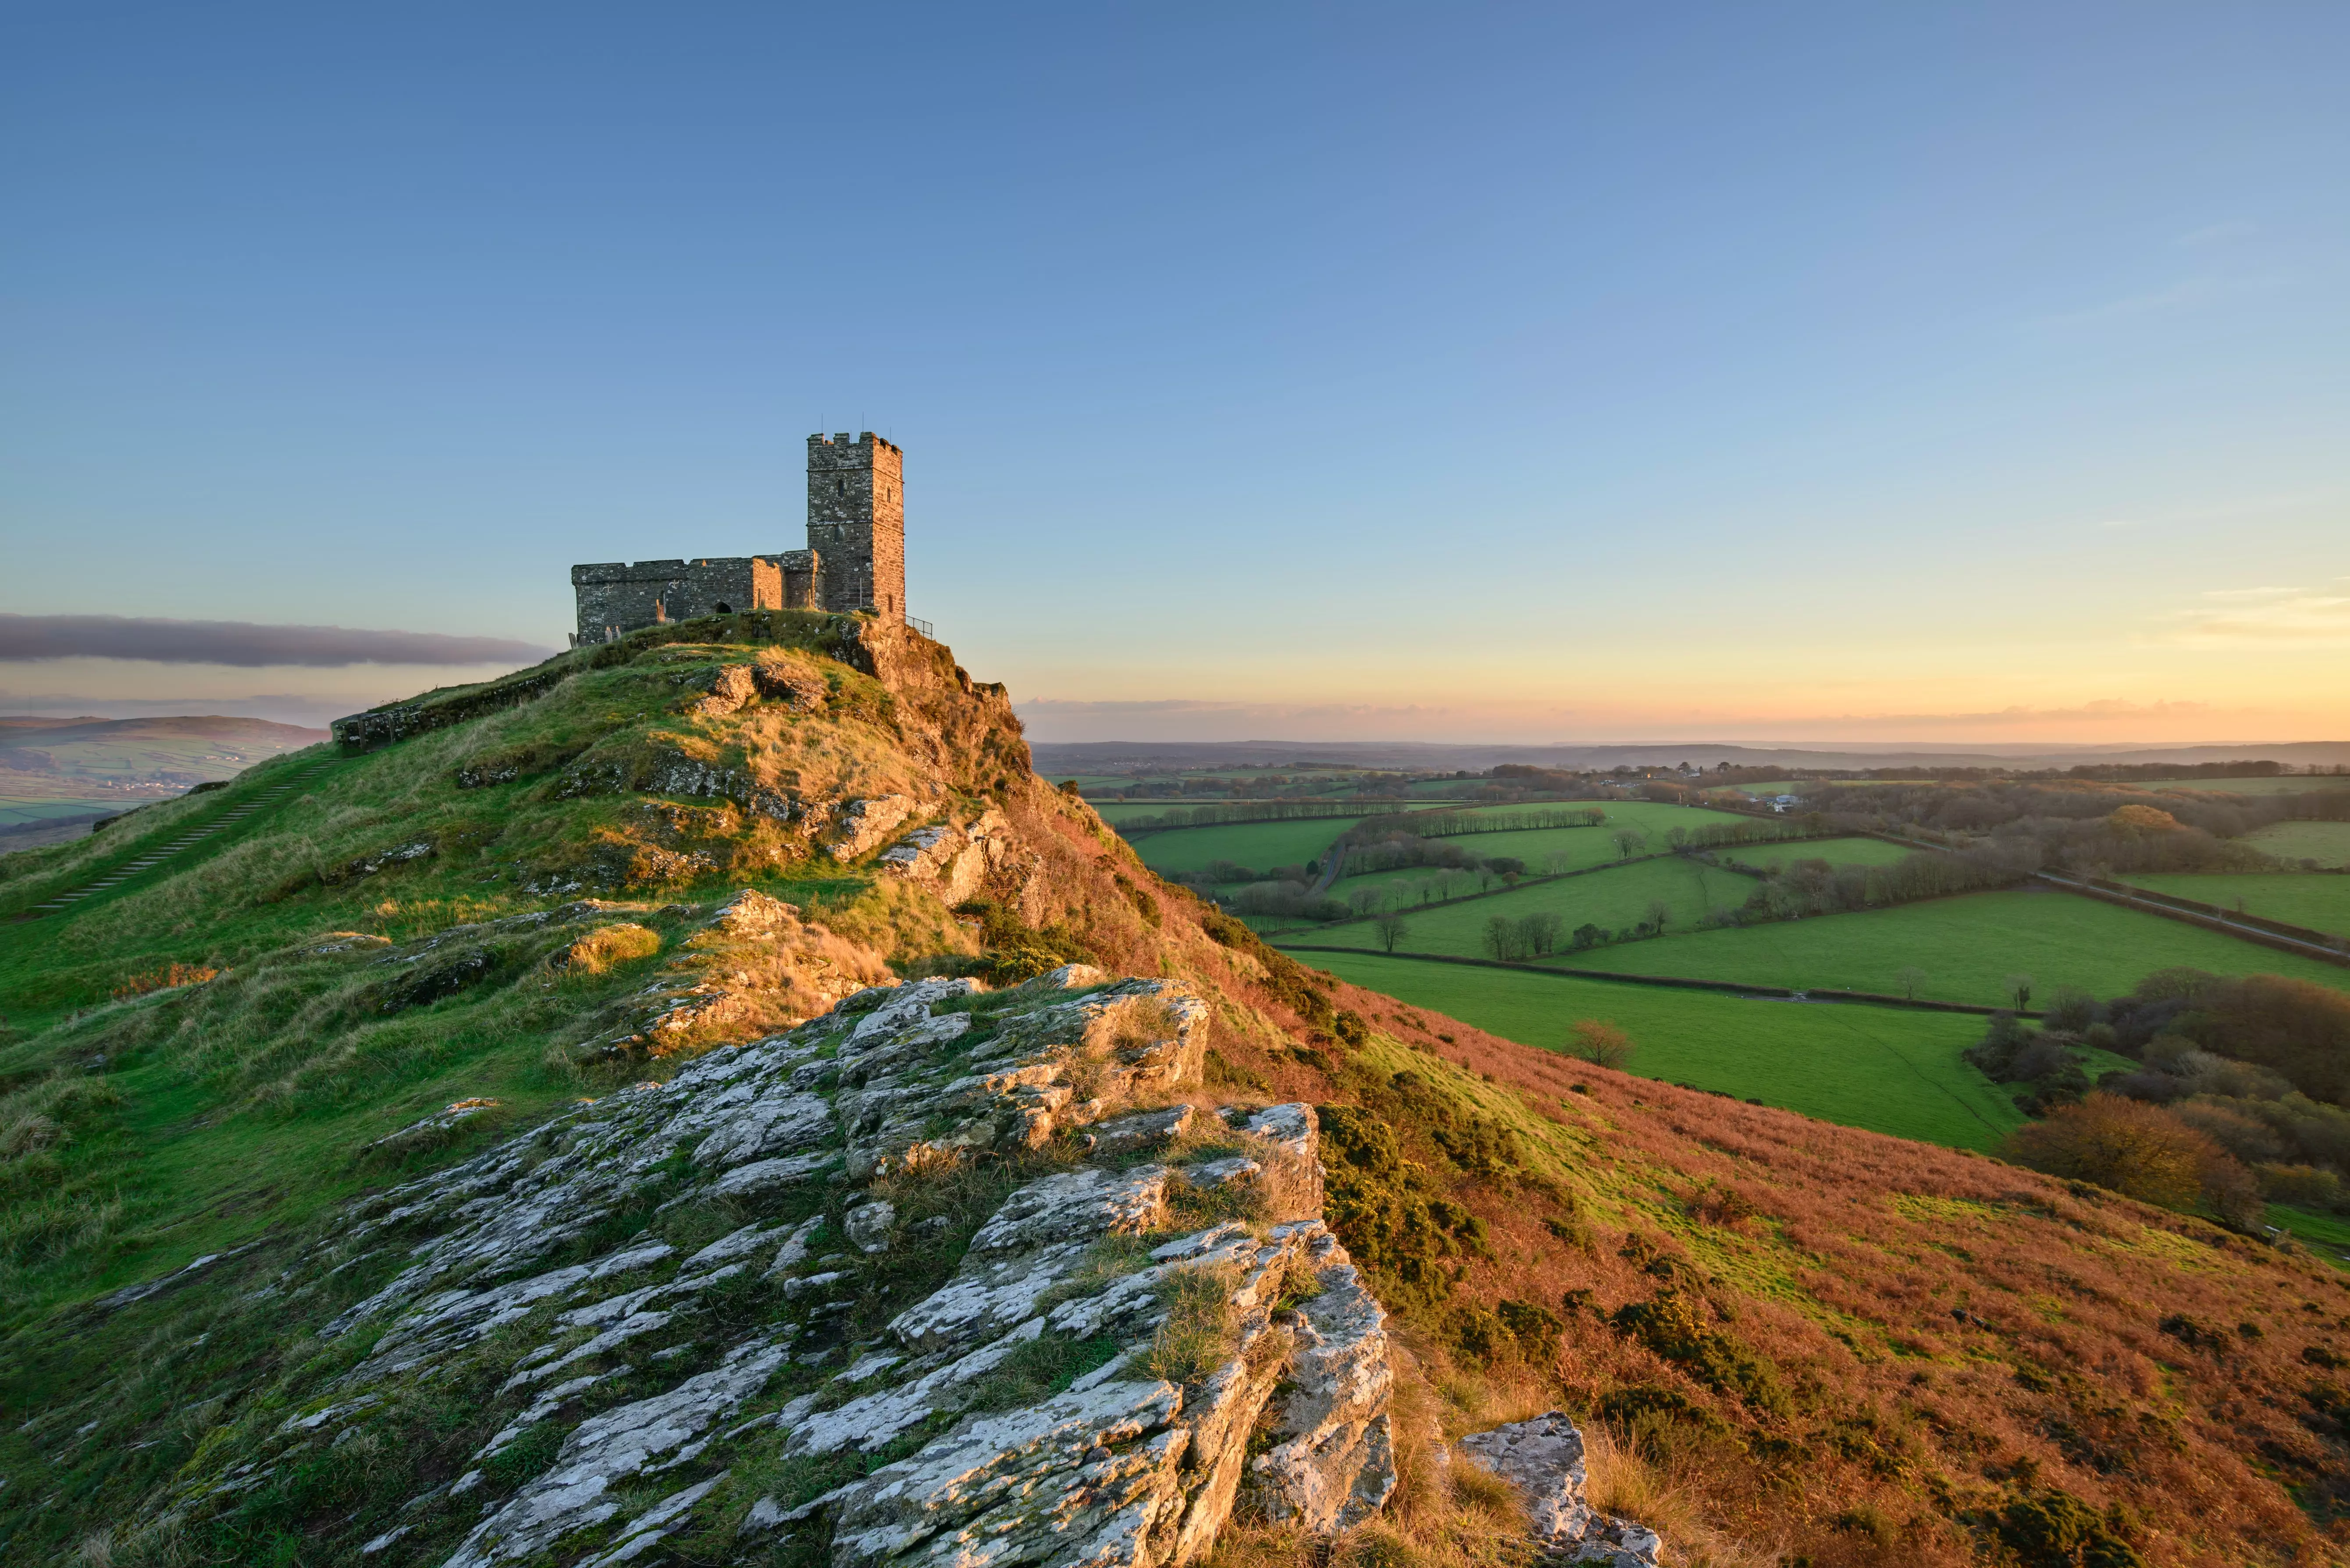 Brentor church perched on a rocky outcrop on Dartmoor National Park in Devon